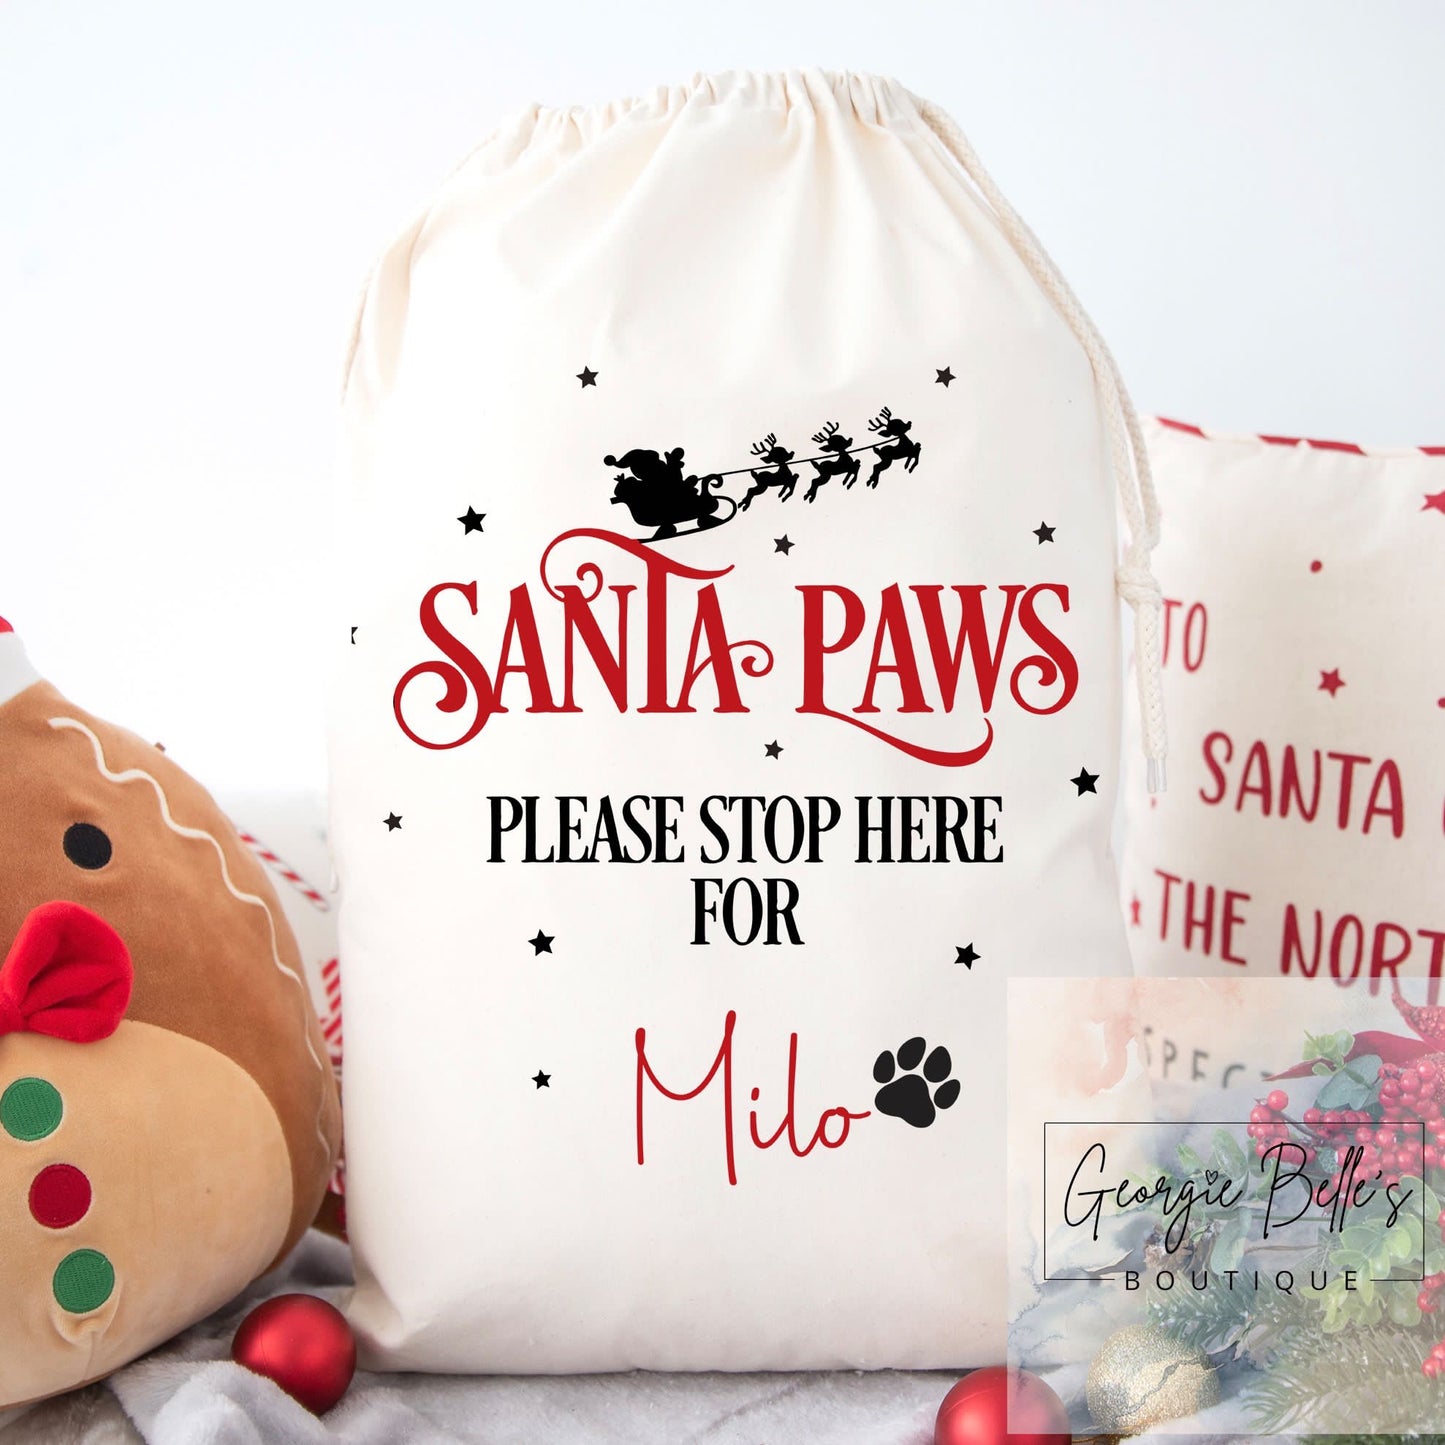 Luxury Personalised Premium Cotton Christmas Sack for Dogs/Cats- Paw Design